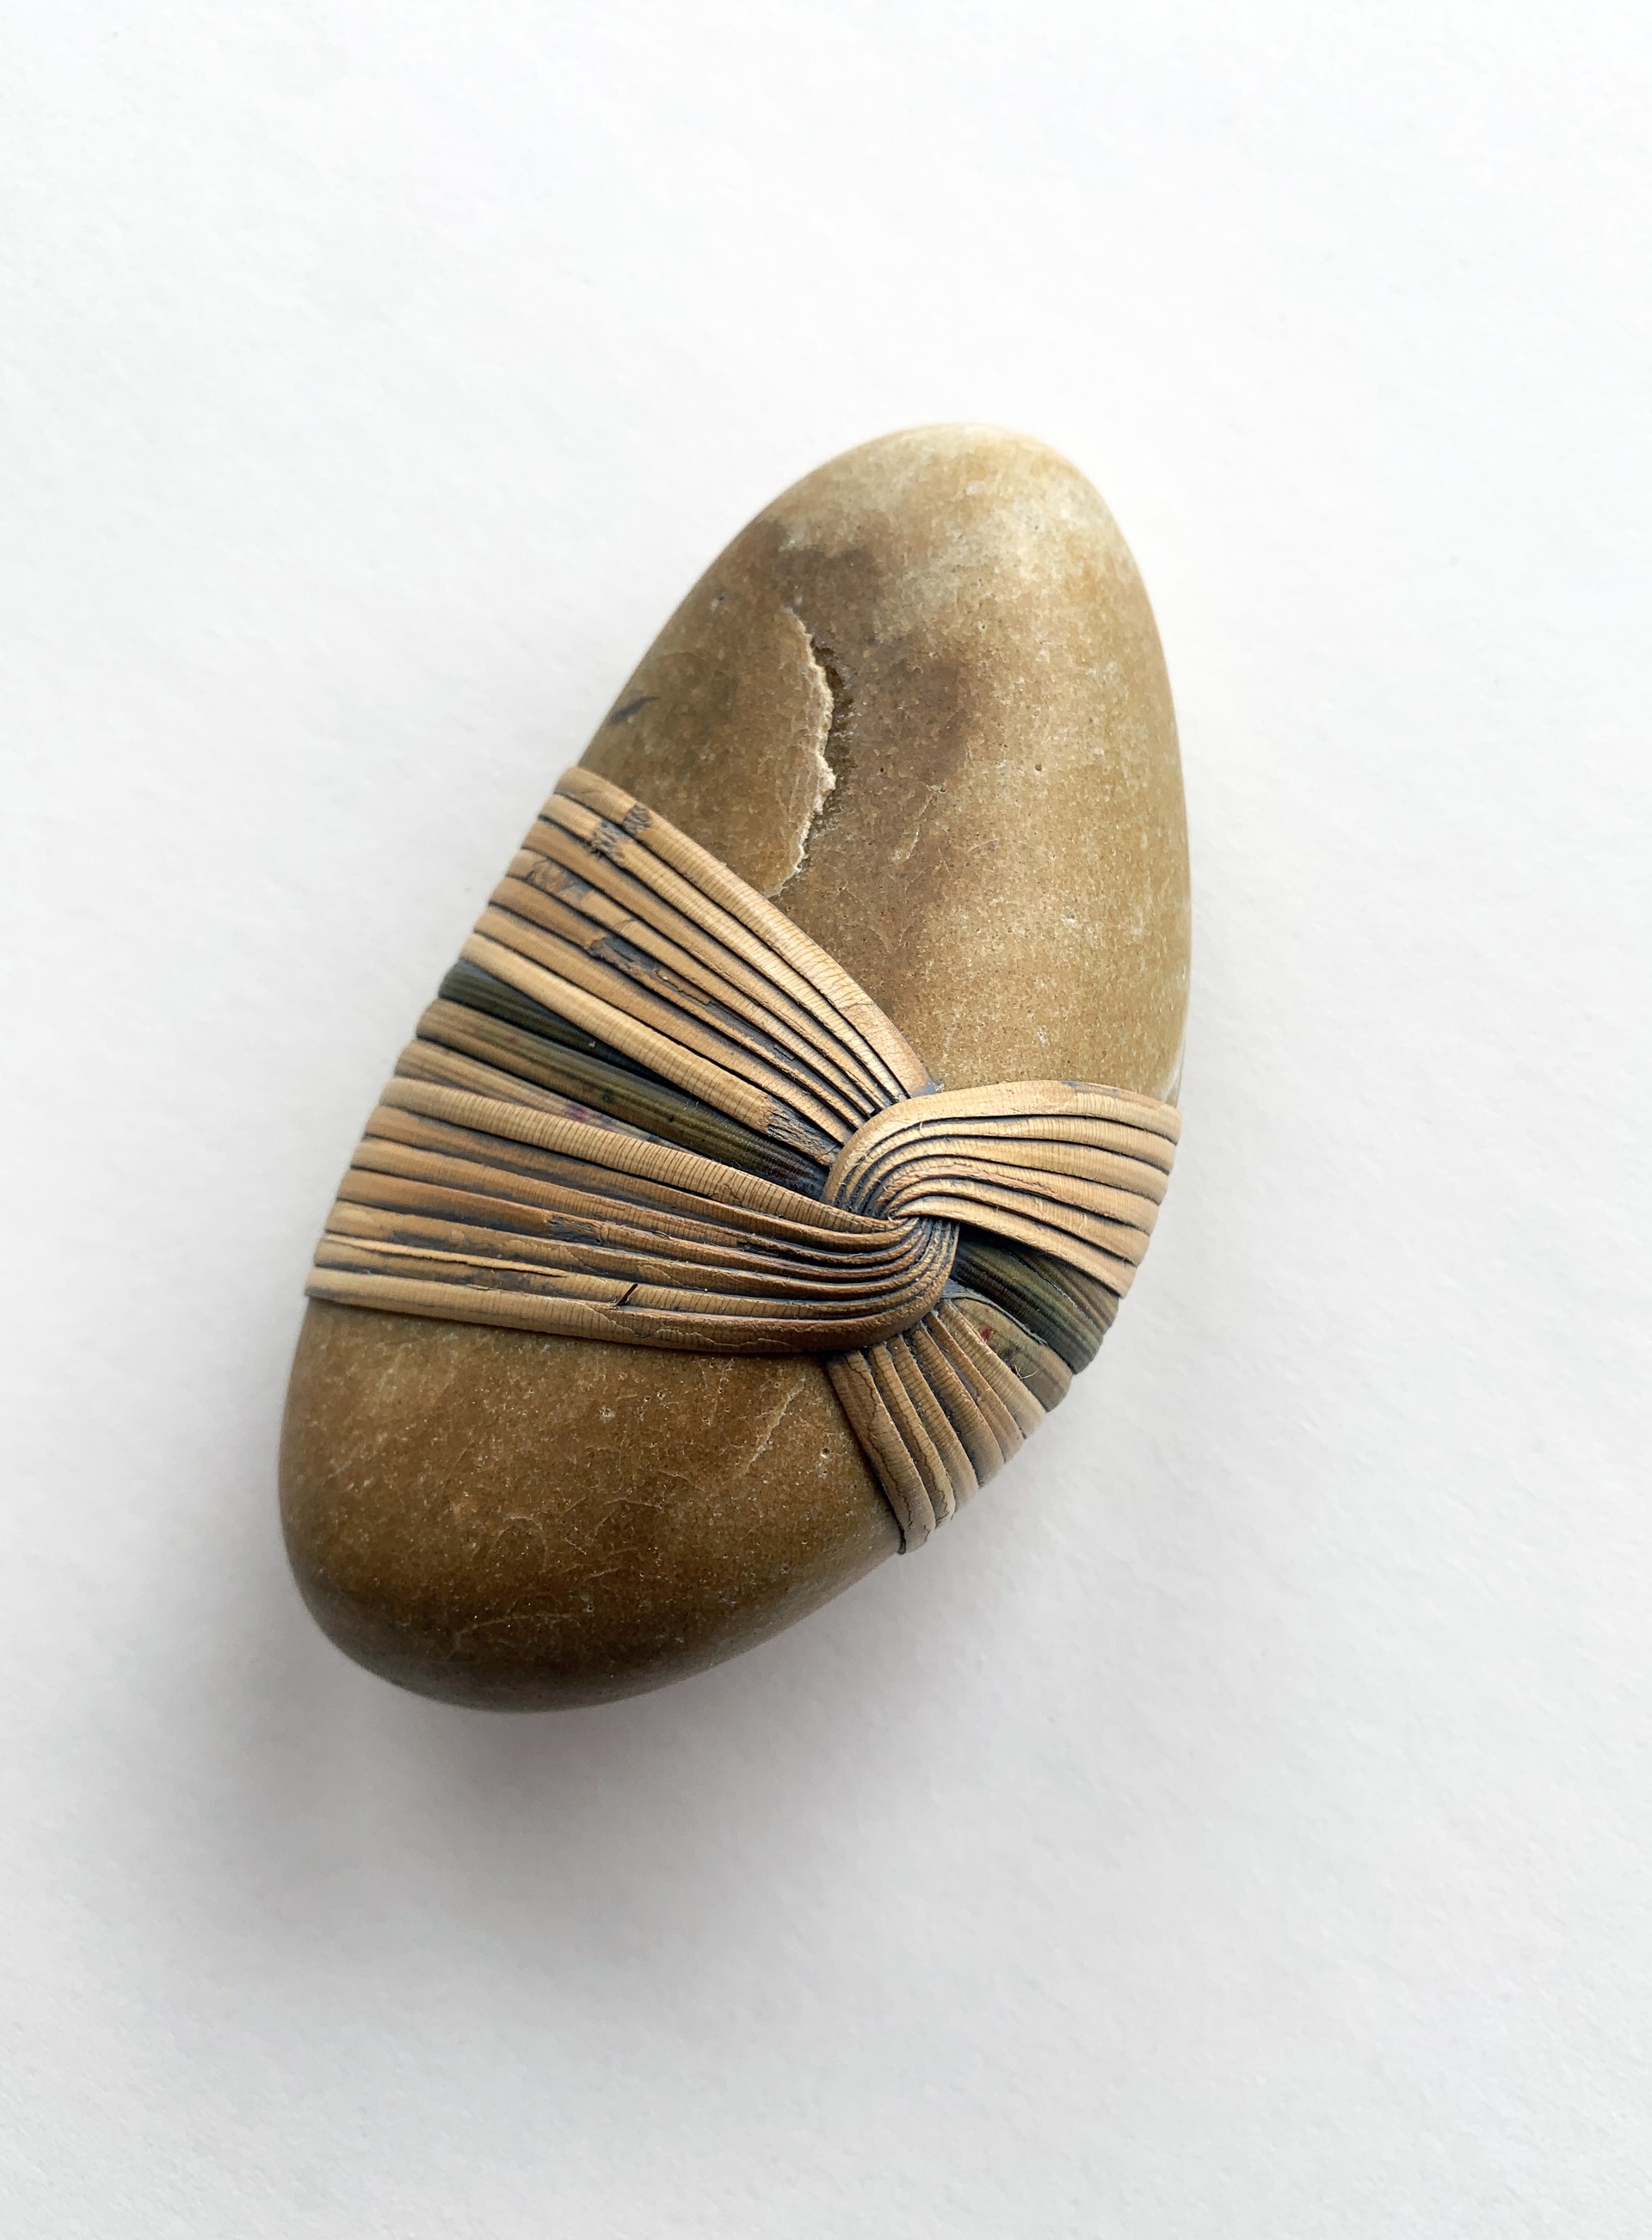 Small Blessing Stone 7 by Deloss Webber